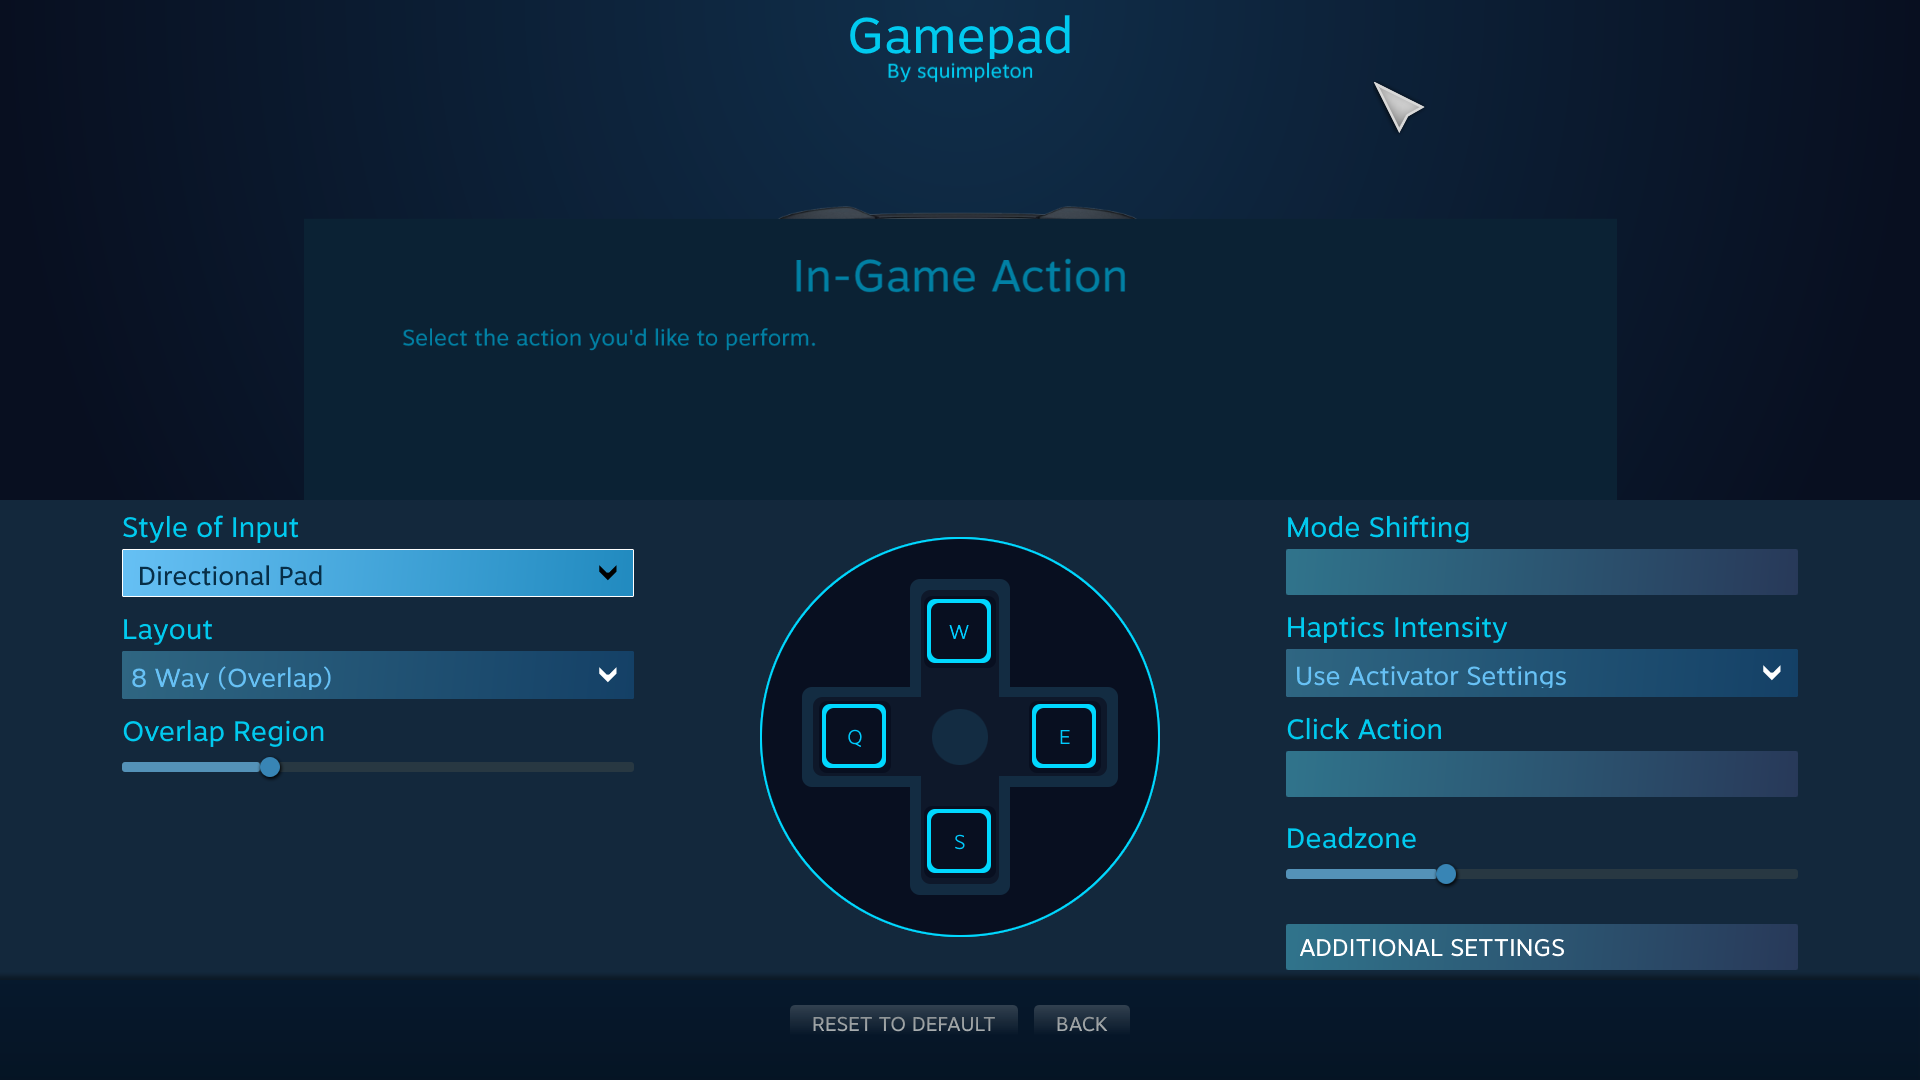 How to use Steam controller with emulators: create a Project 64 Steam  controller config and Dolphin Steam controller layout